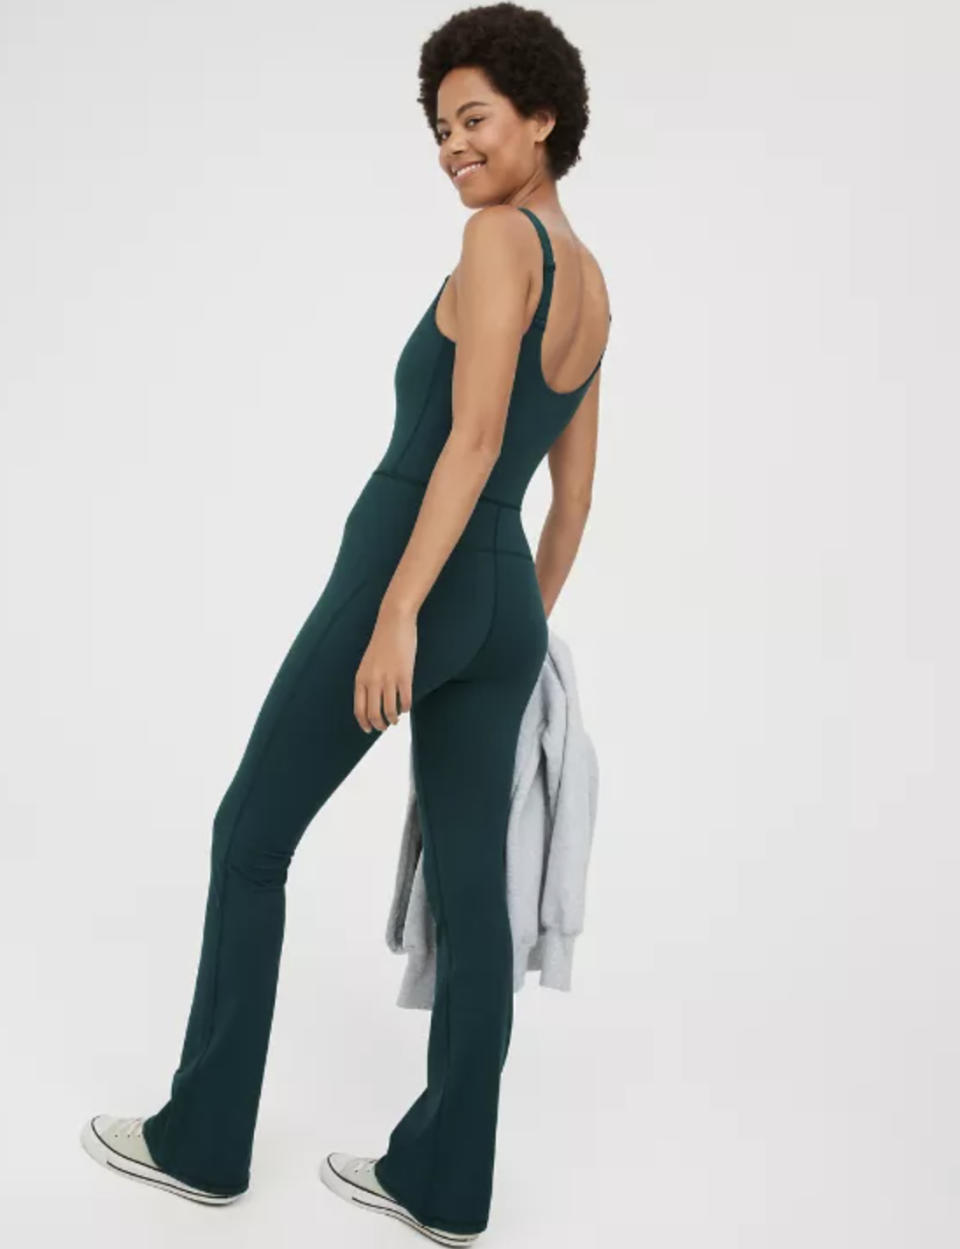 Model in the teal jumpsuit